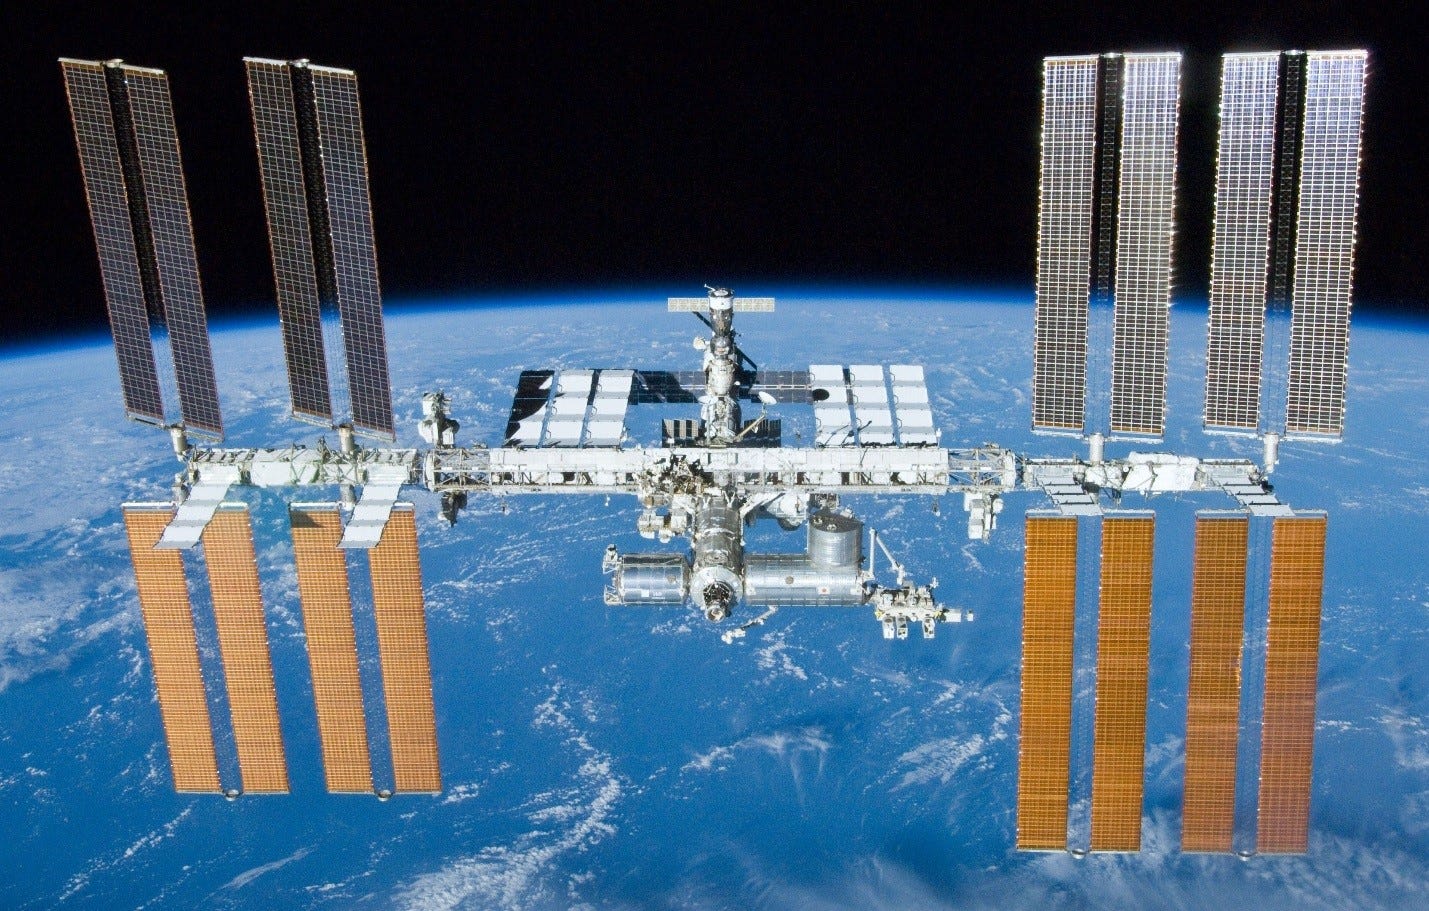 The role of the International Space Station in the commercialization of space